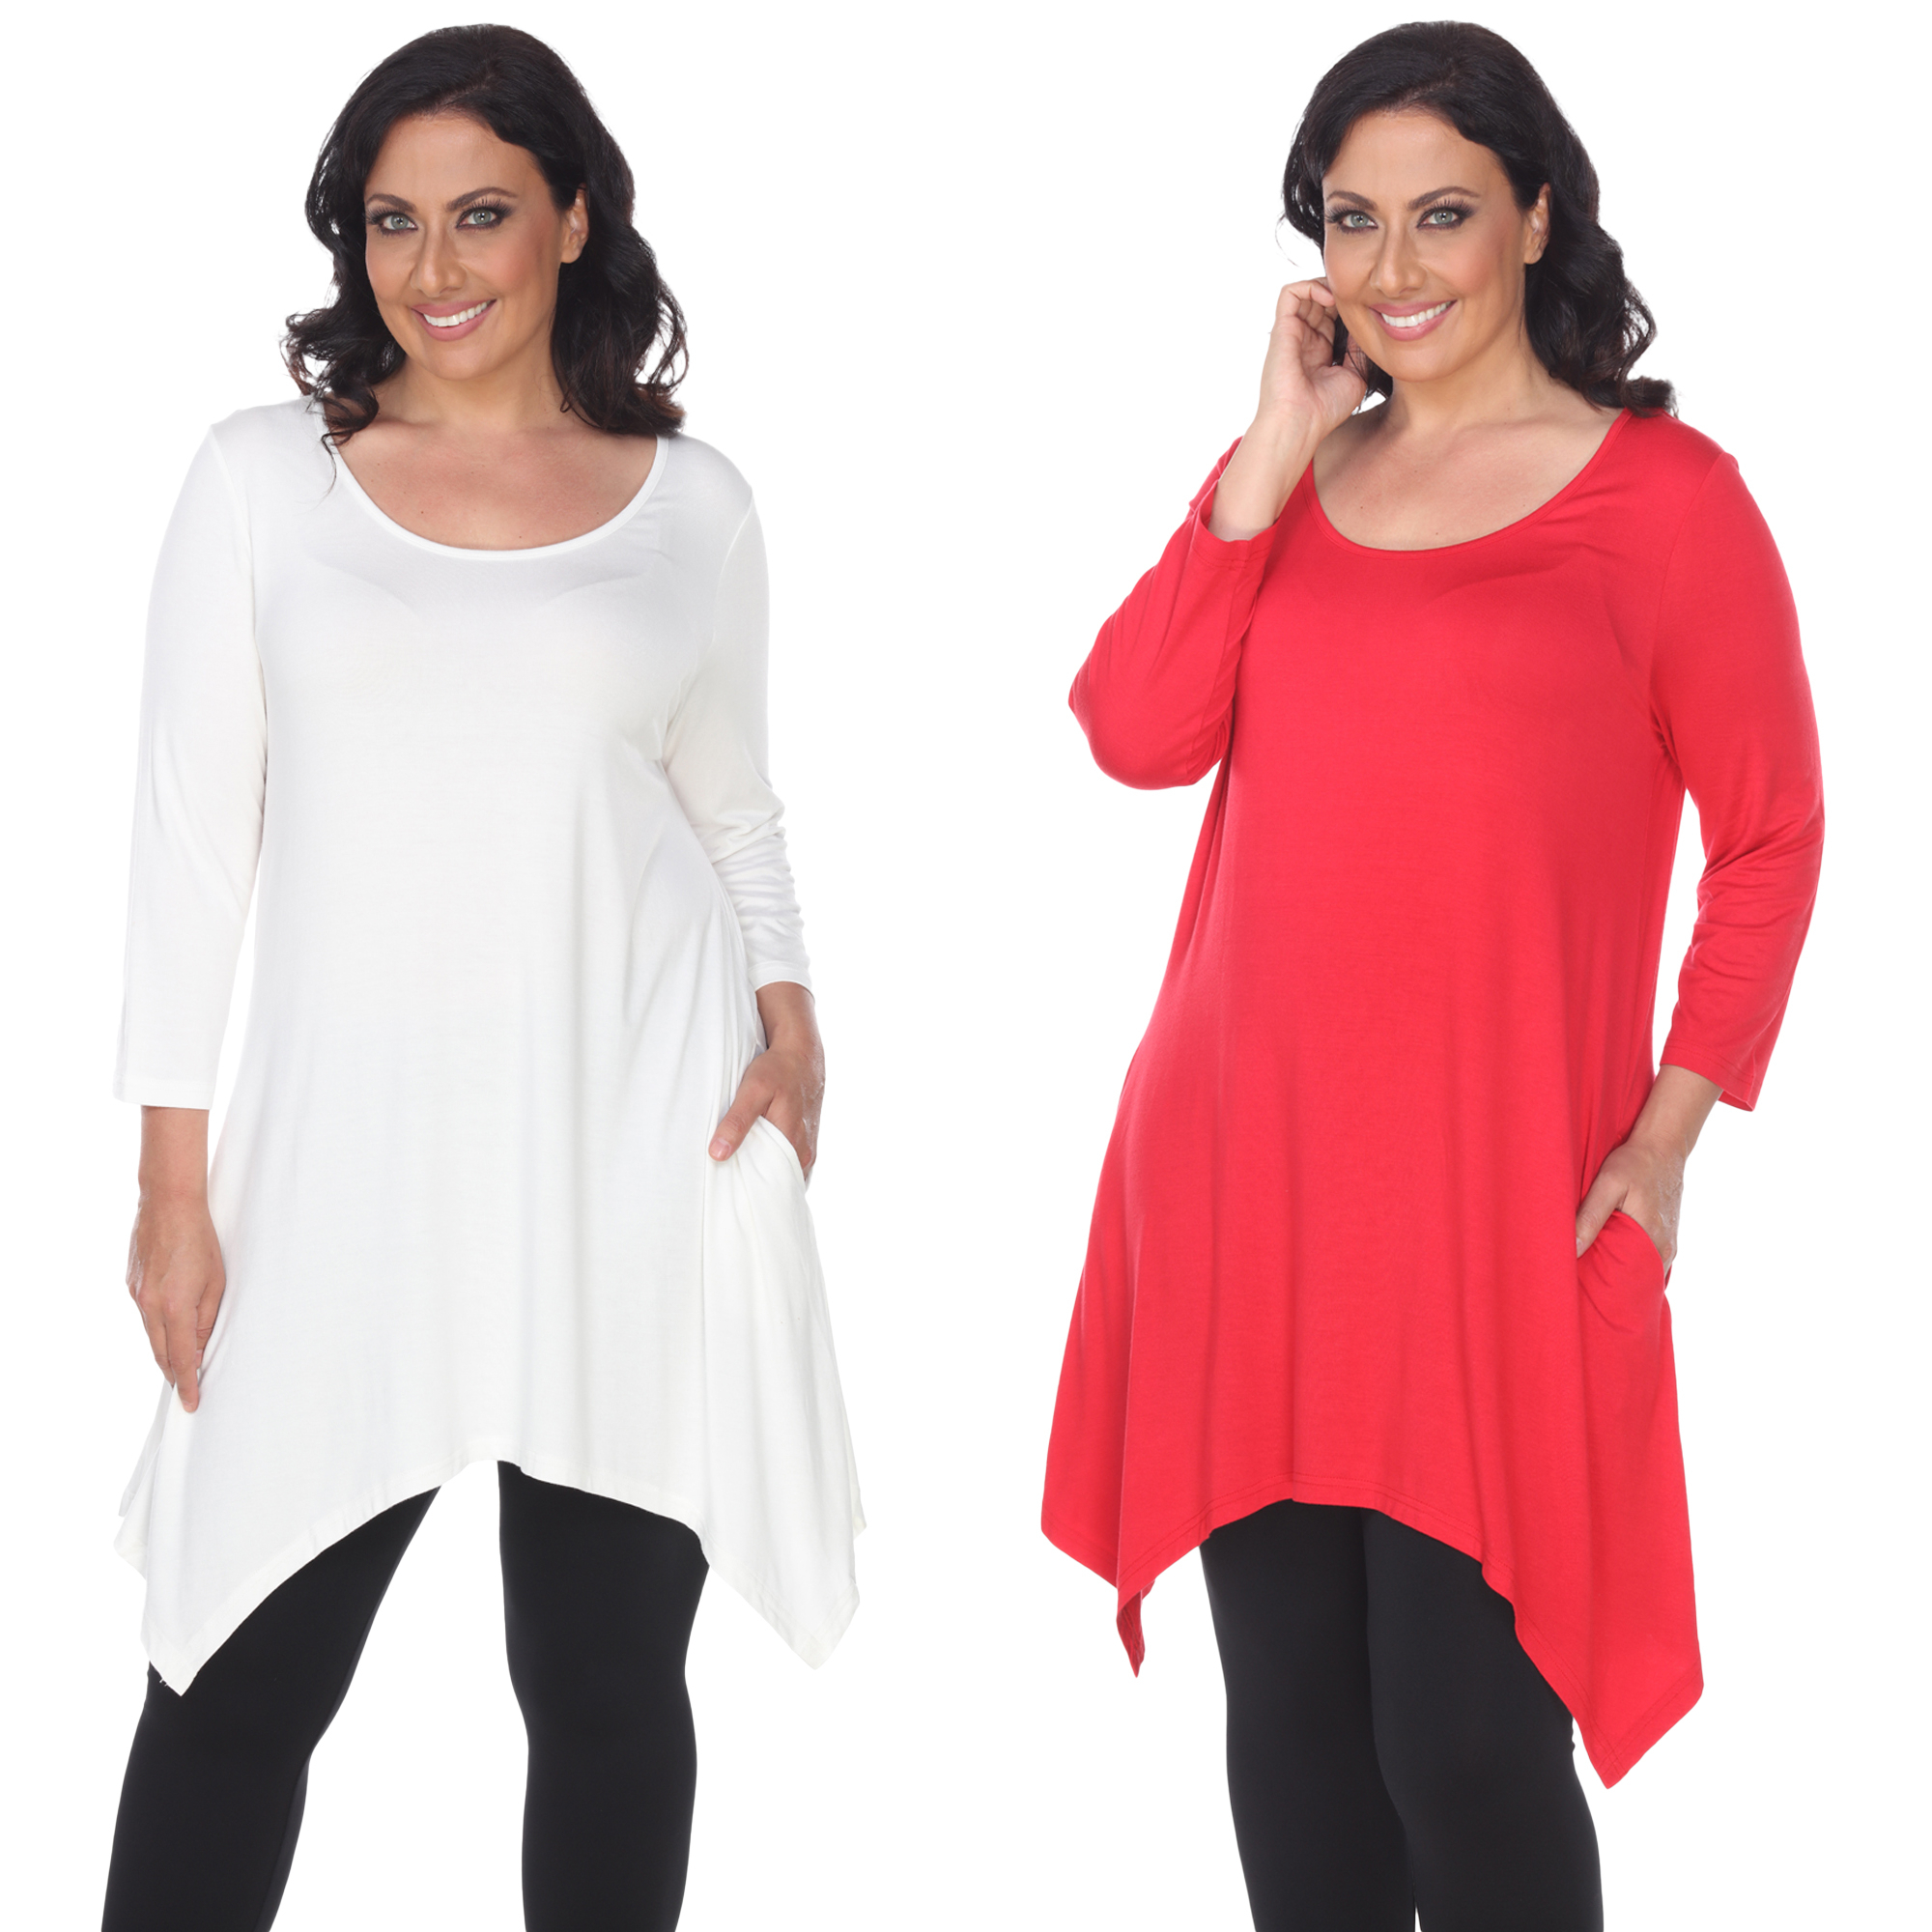 White Mark Women's Pack Of 2 White Tunic Top - White, Coral, 3X